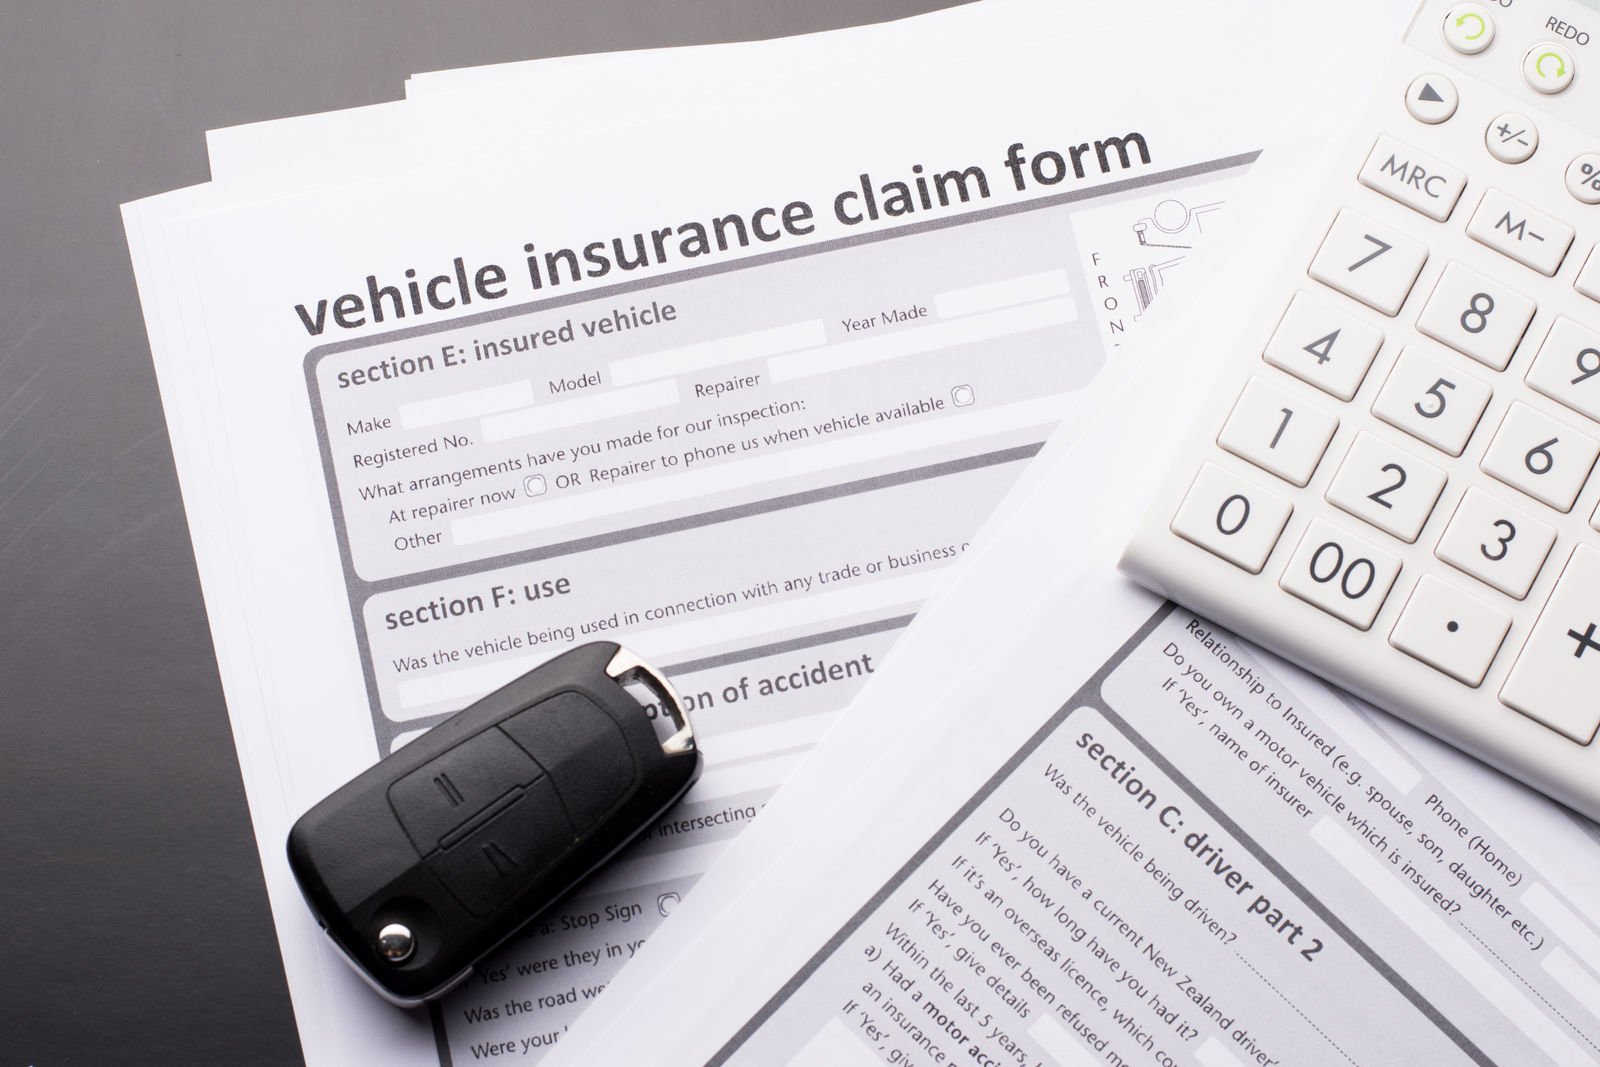 How long do car insurance claims stay on your record?